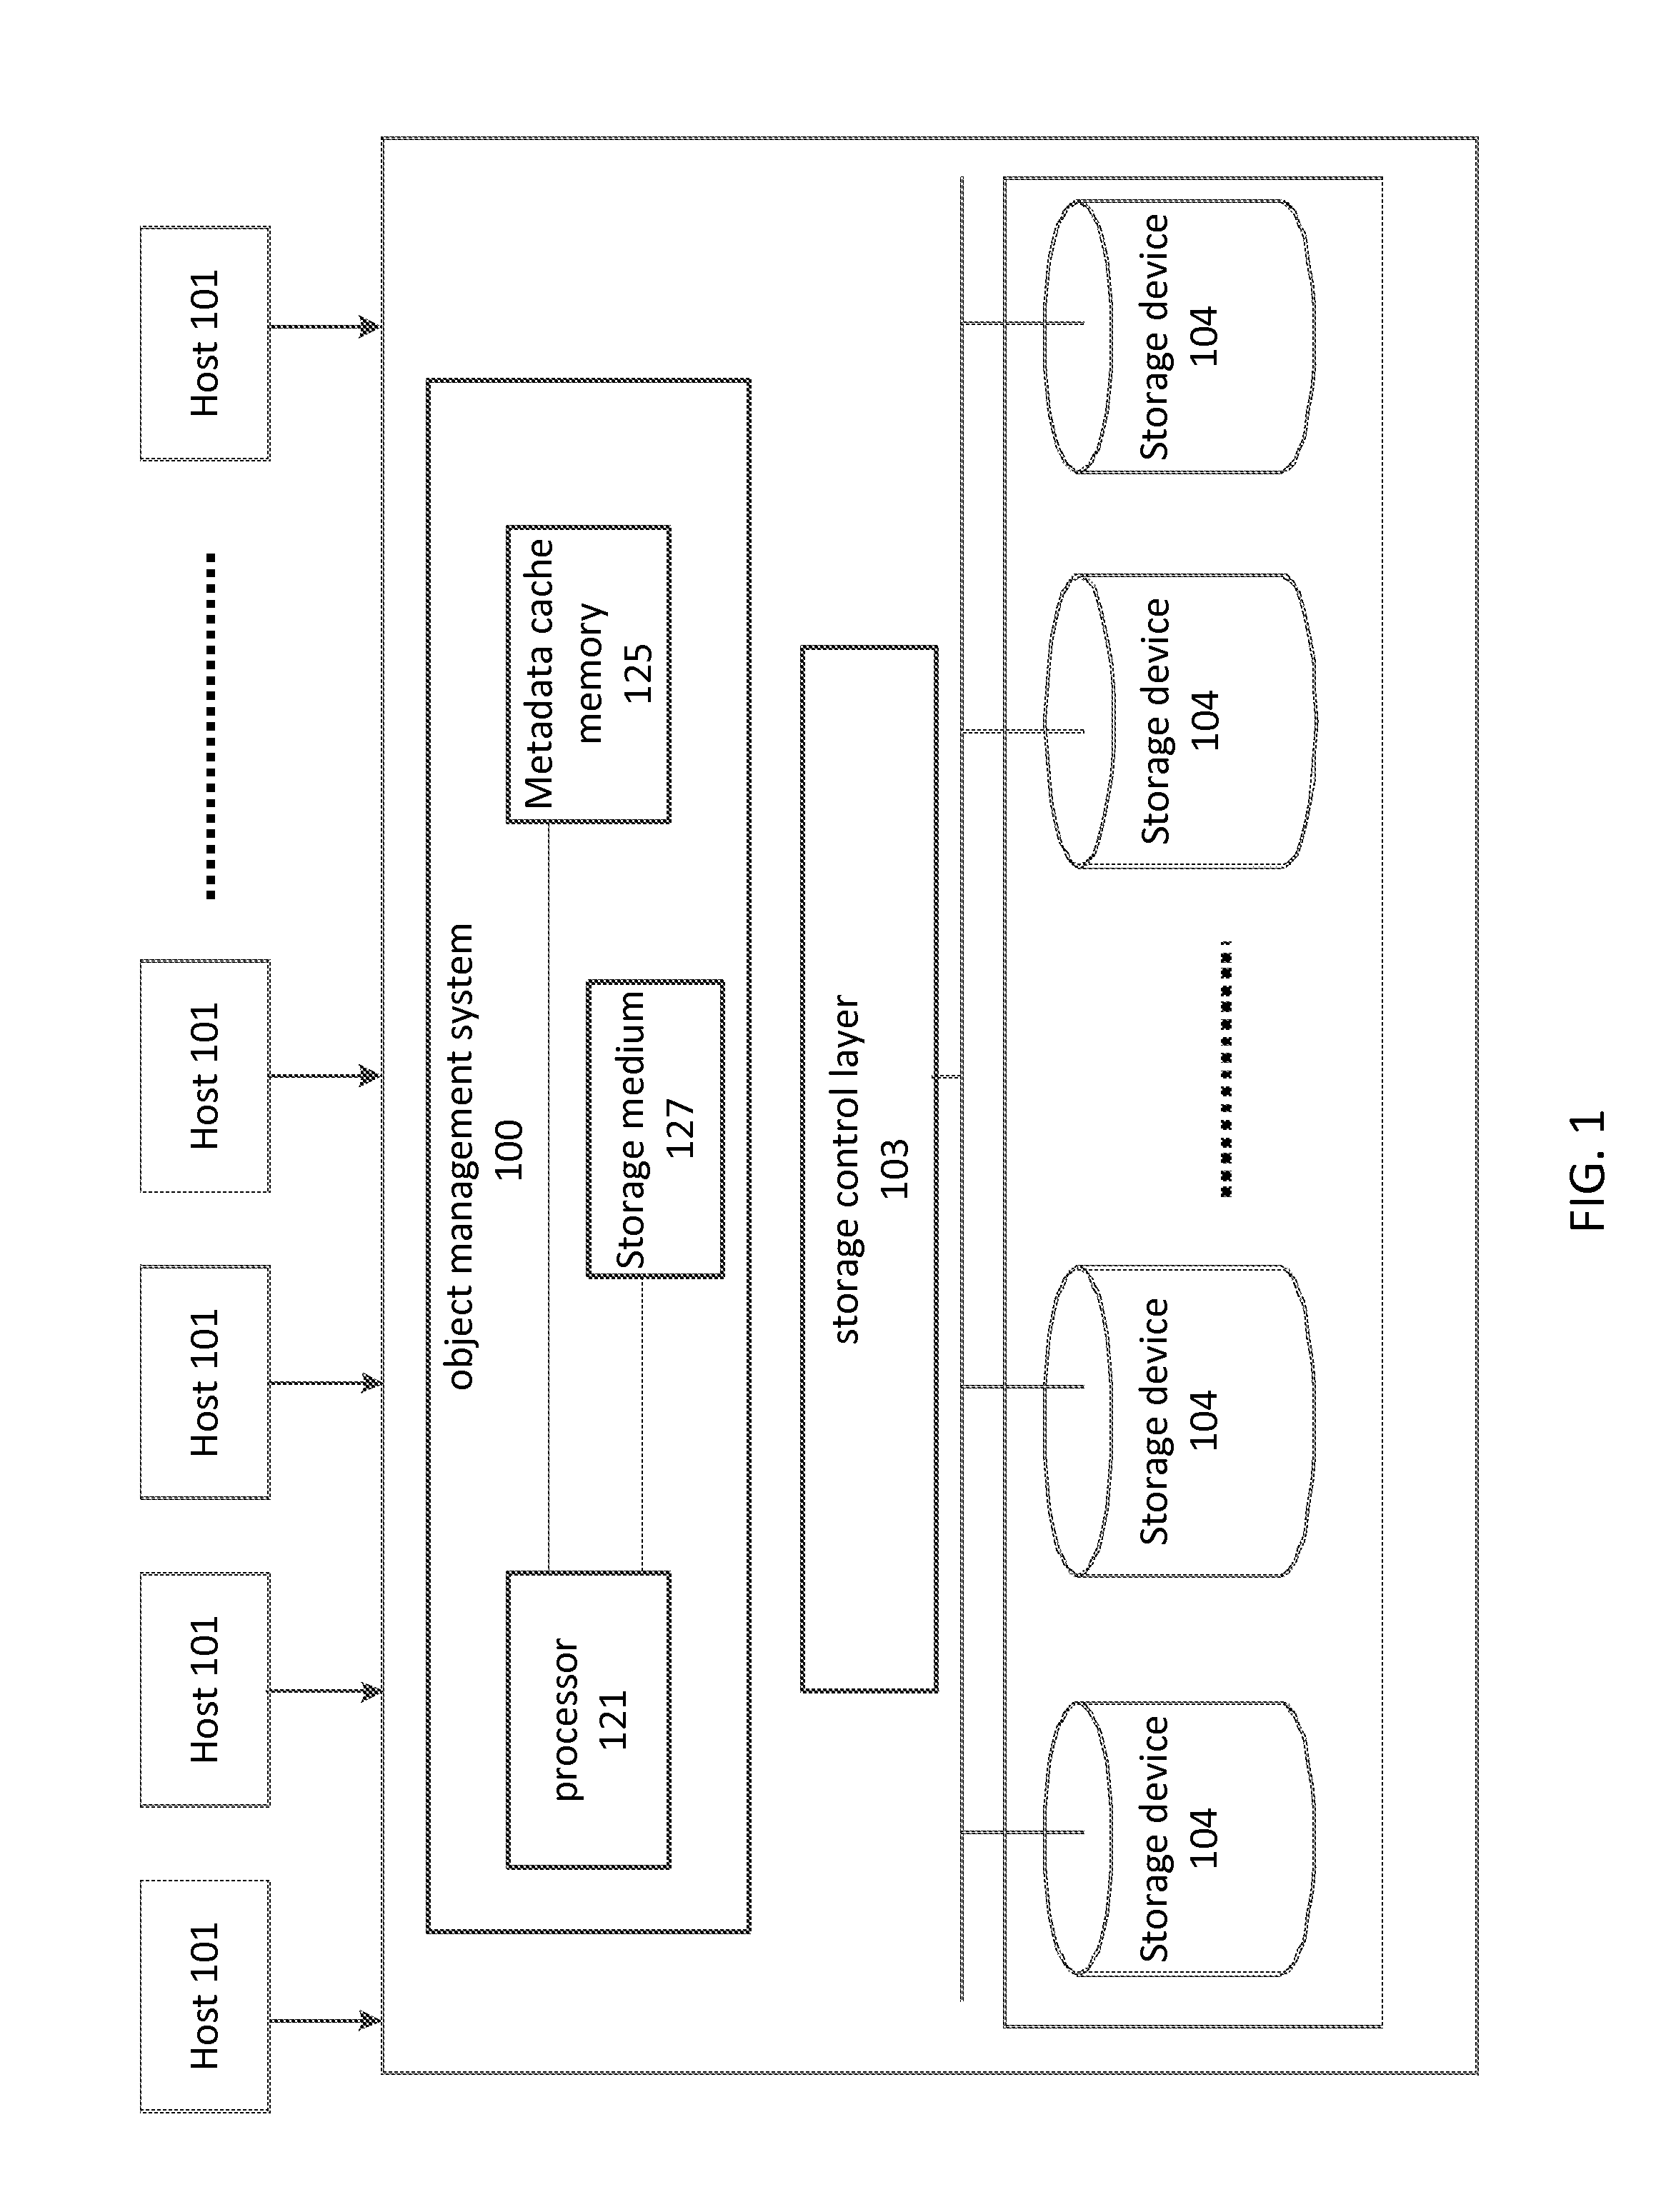 System and method for managing filesystem objects